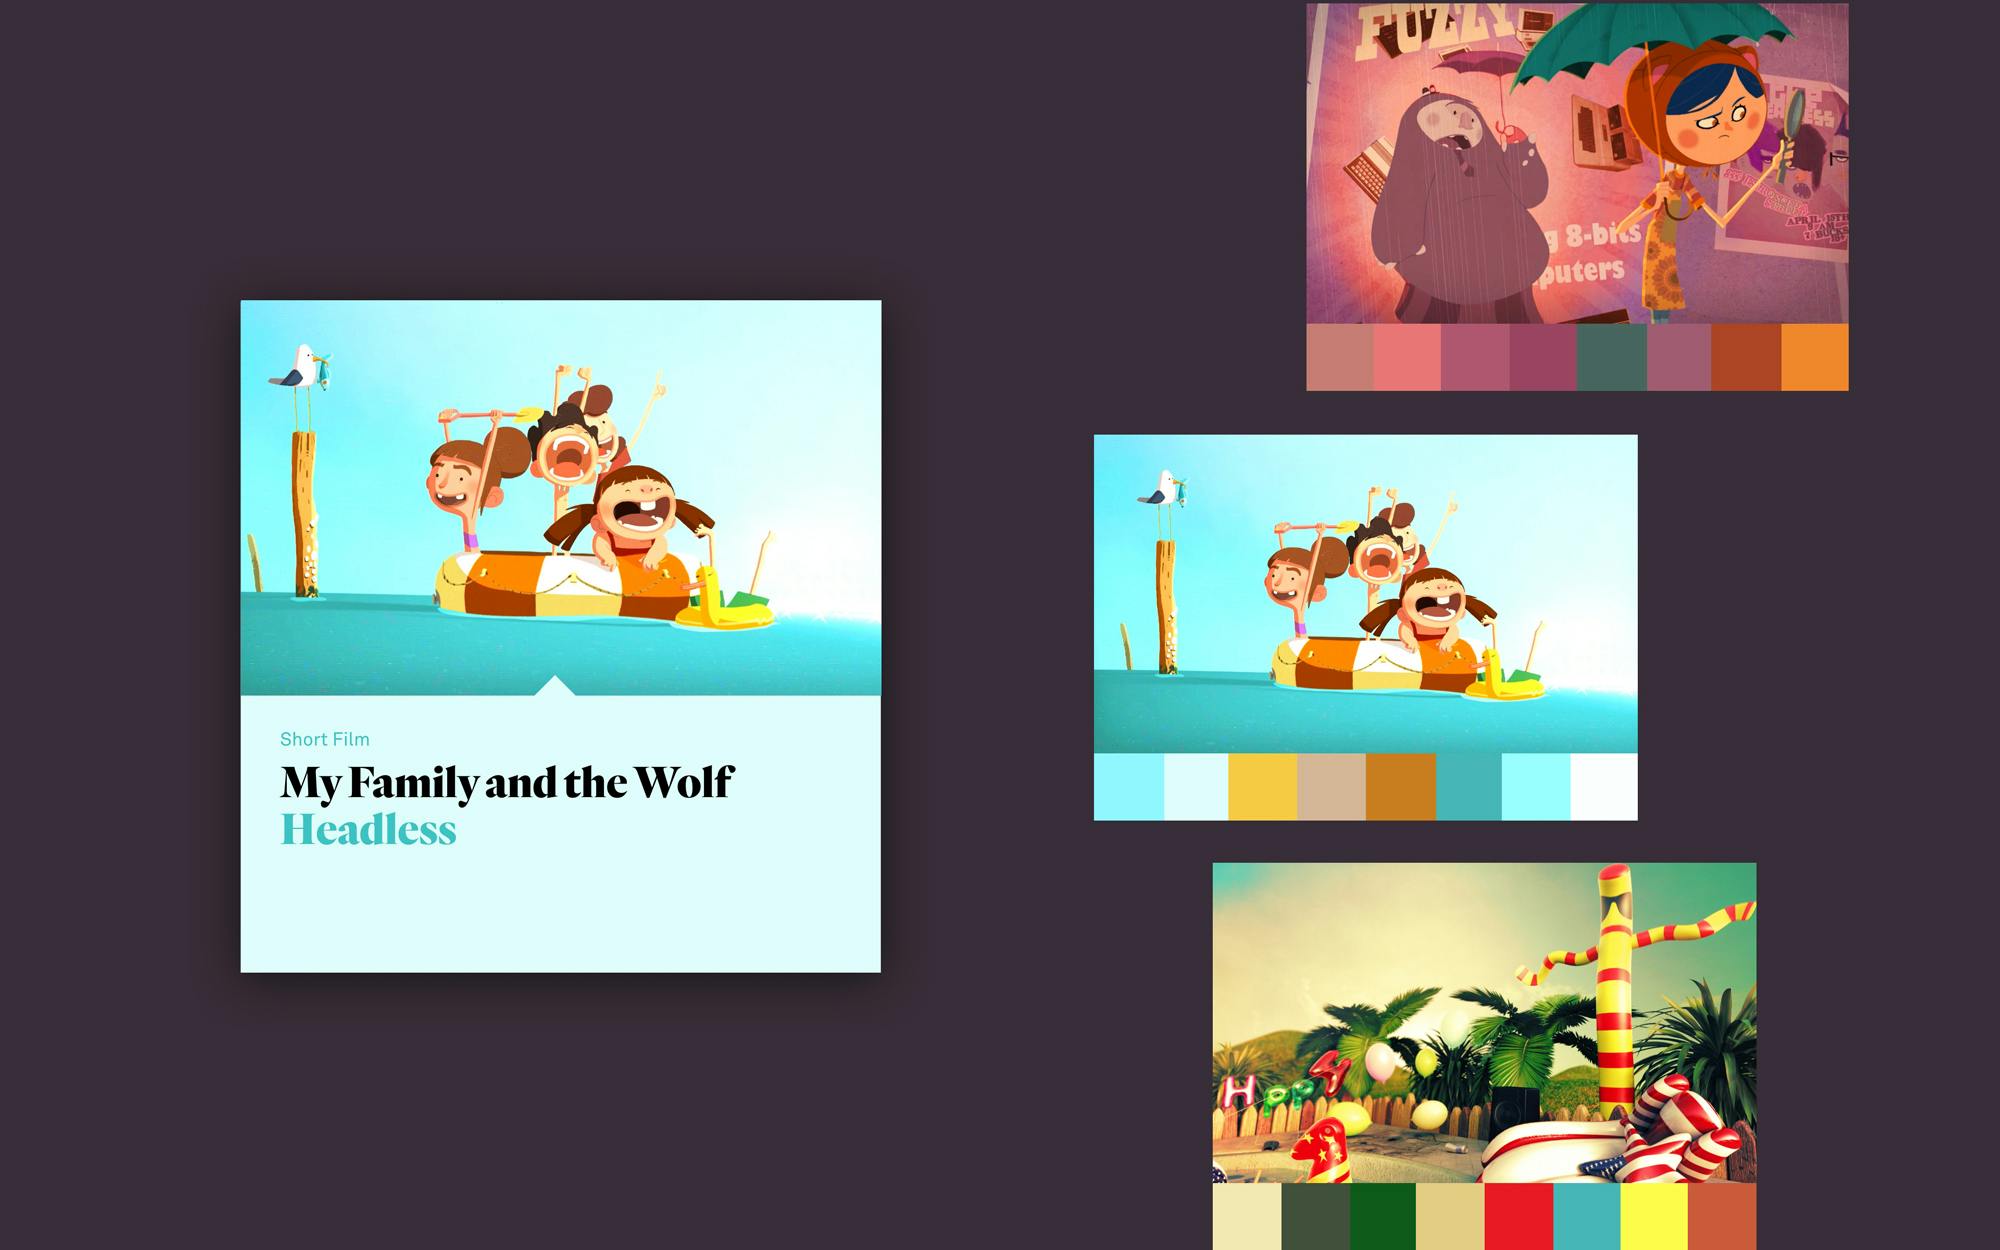 Website for Animation Studio Not To Scale, designed by Extract Studio